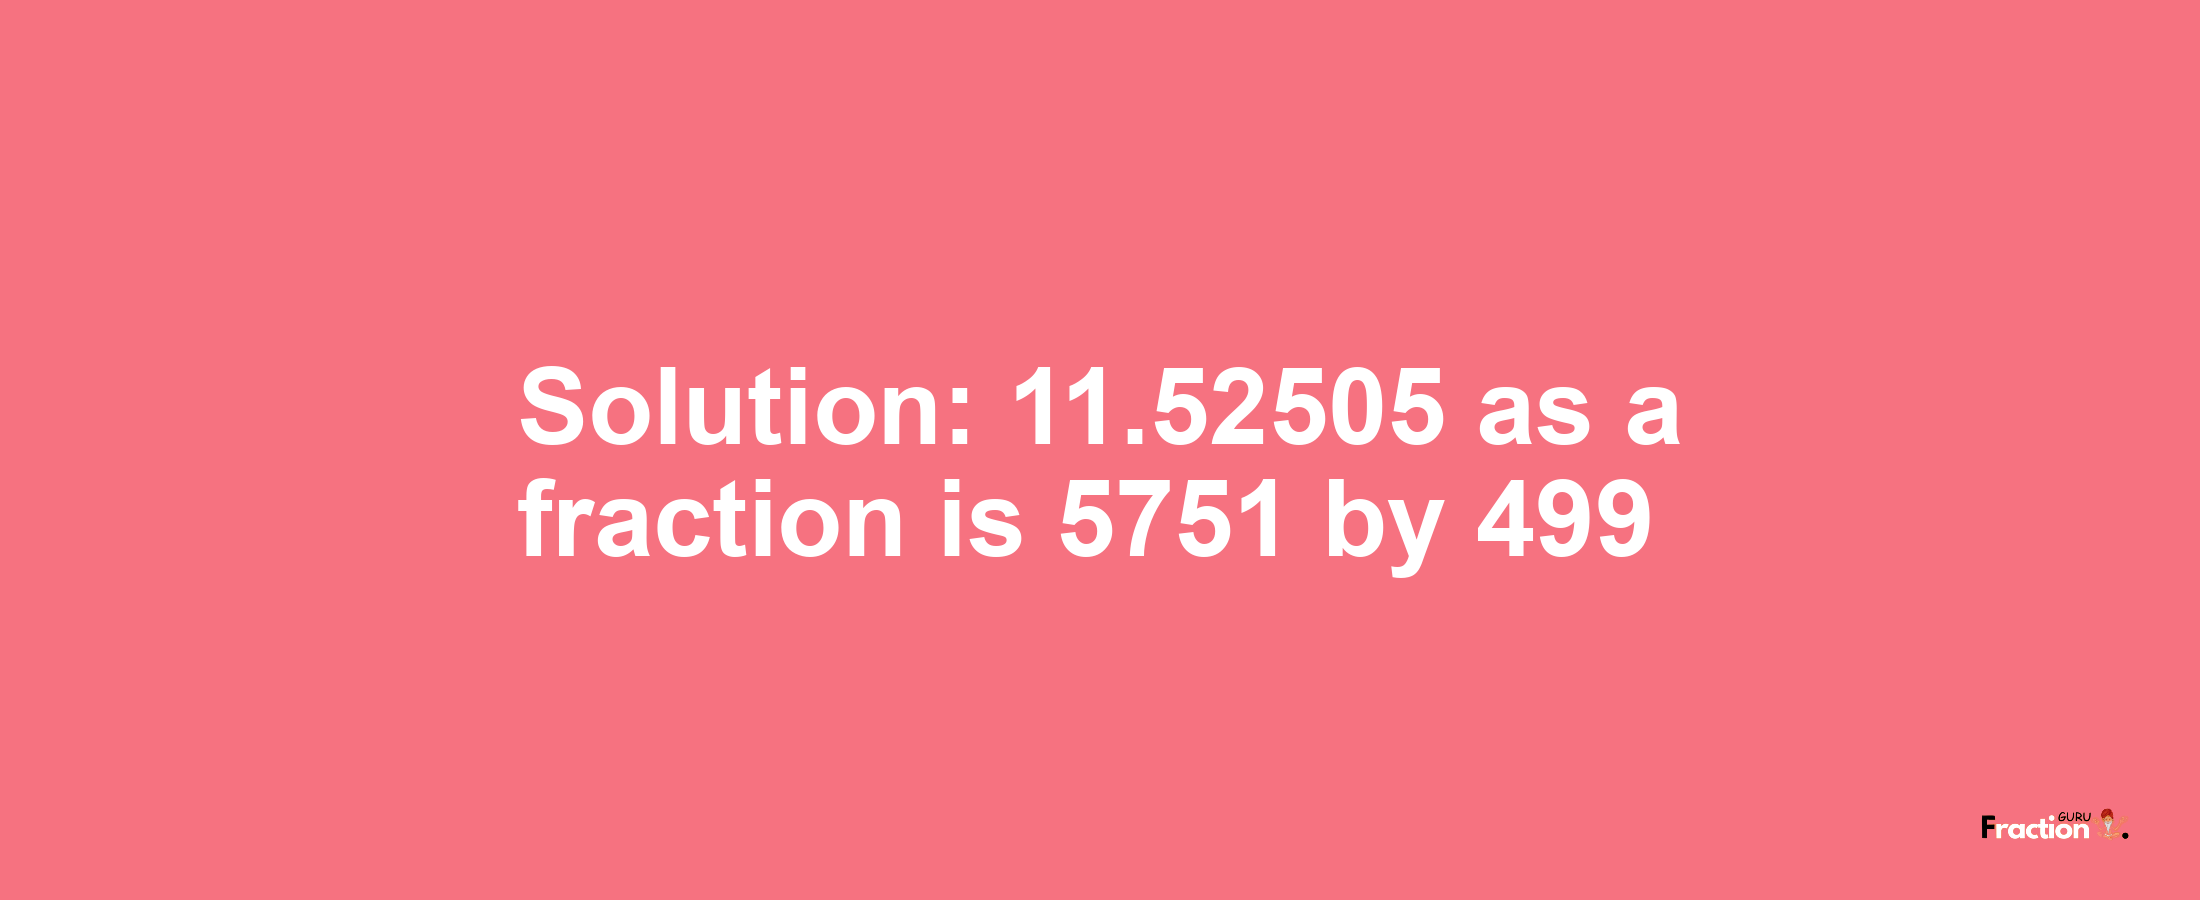 Solution:11.52505 as a fraction is 5751/499